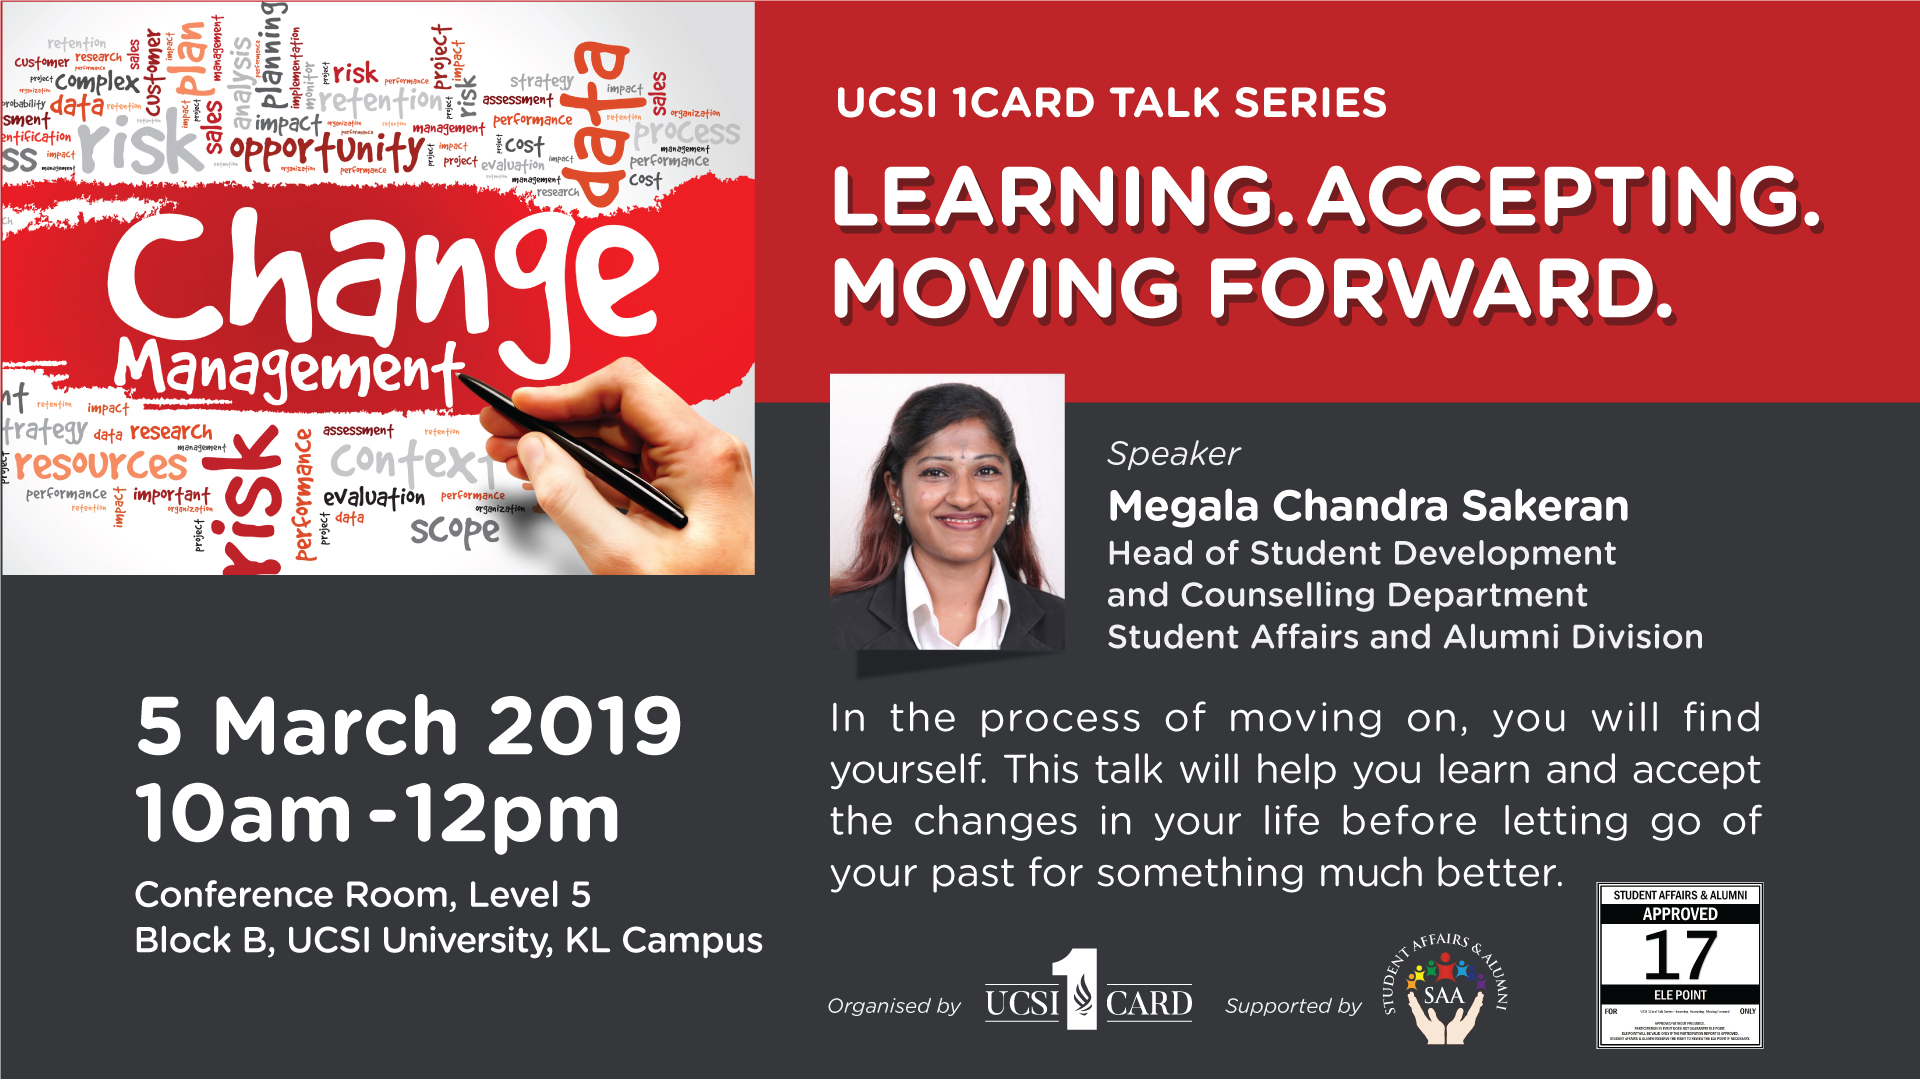 UCSI 1Card Talk Series - Learning. Accepting. Moving Forward